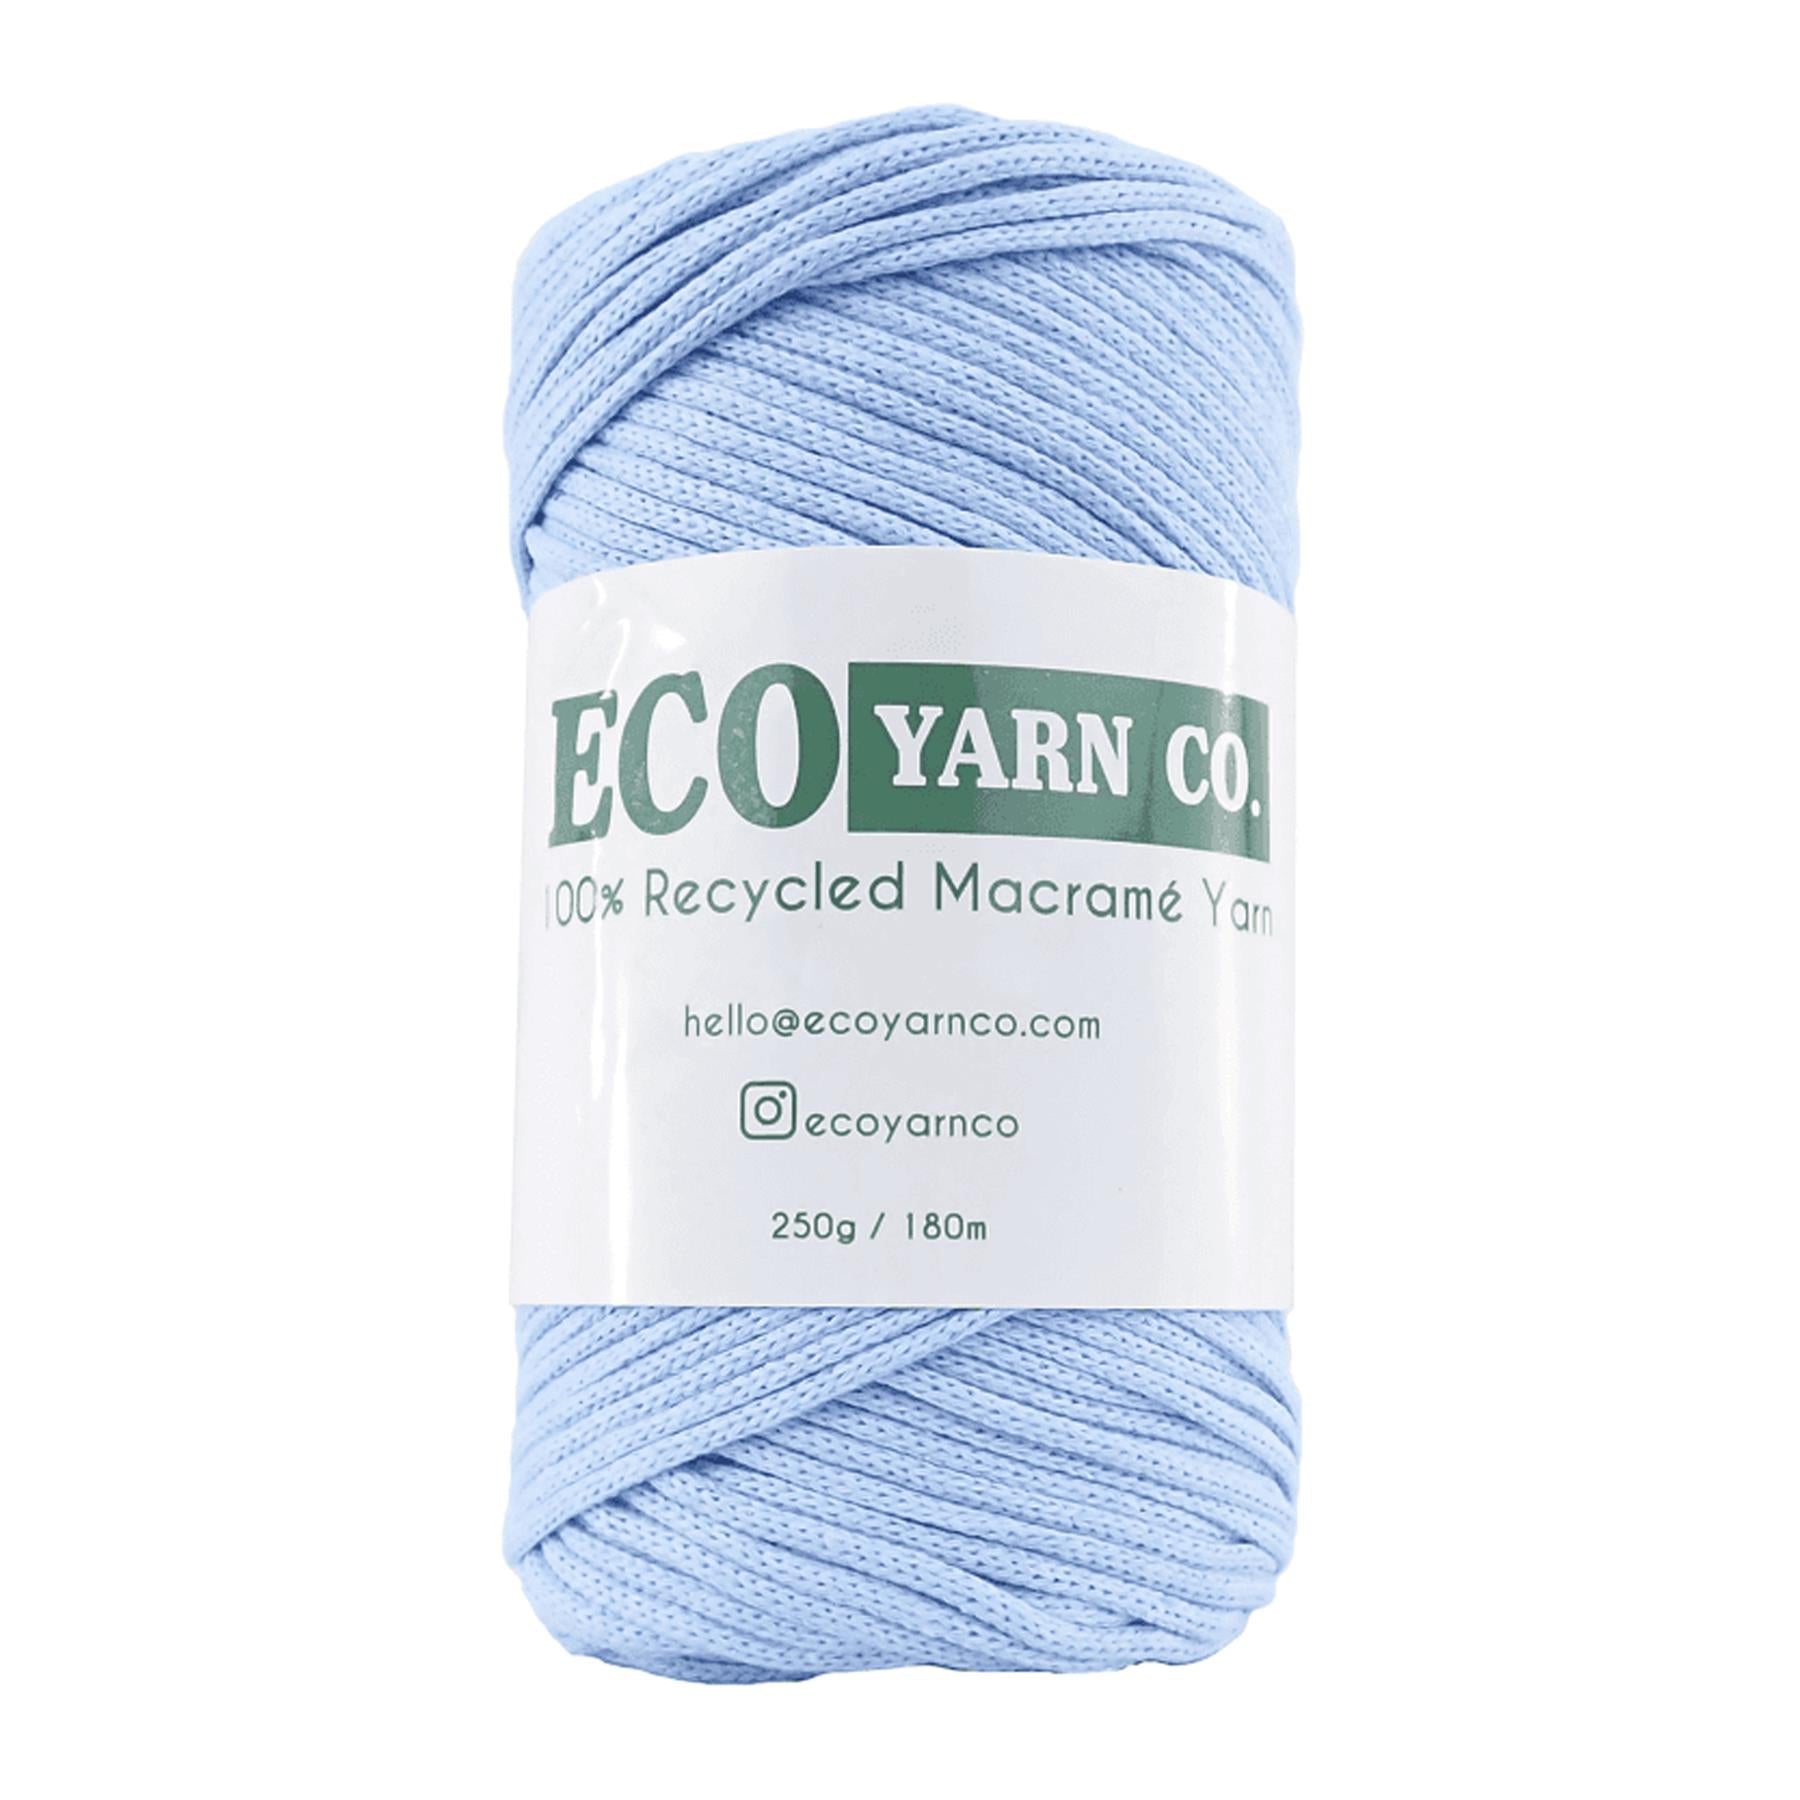 Buy Macrame Cord Online UK  100% Recycled & Eco Friendly – The